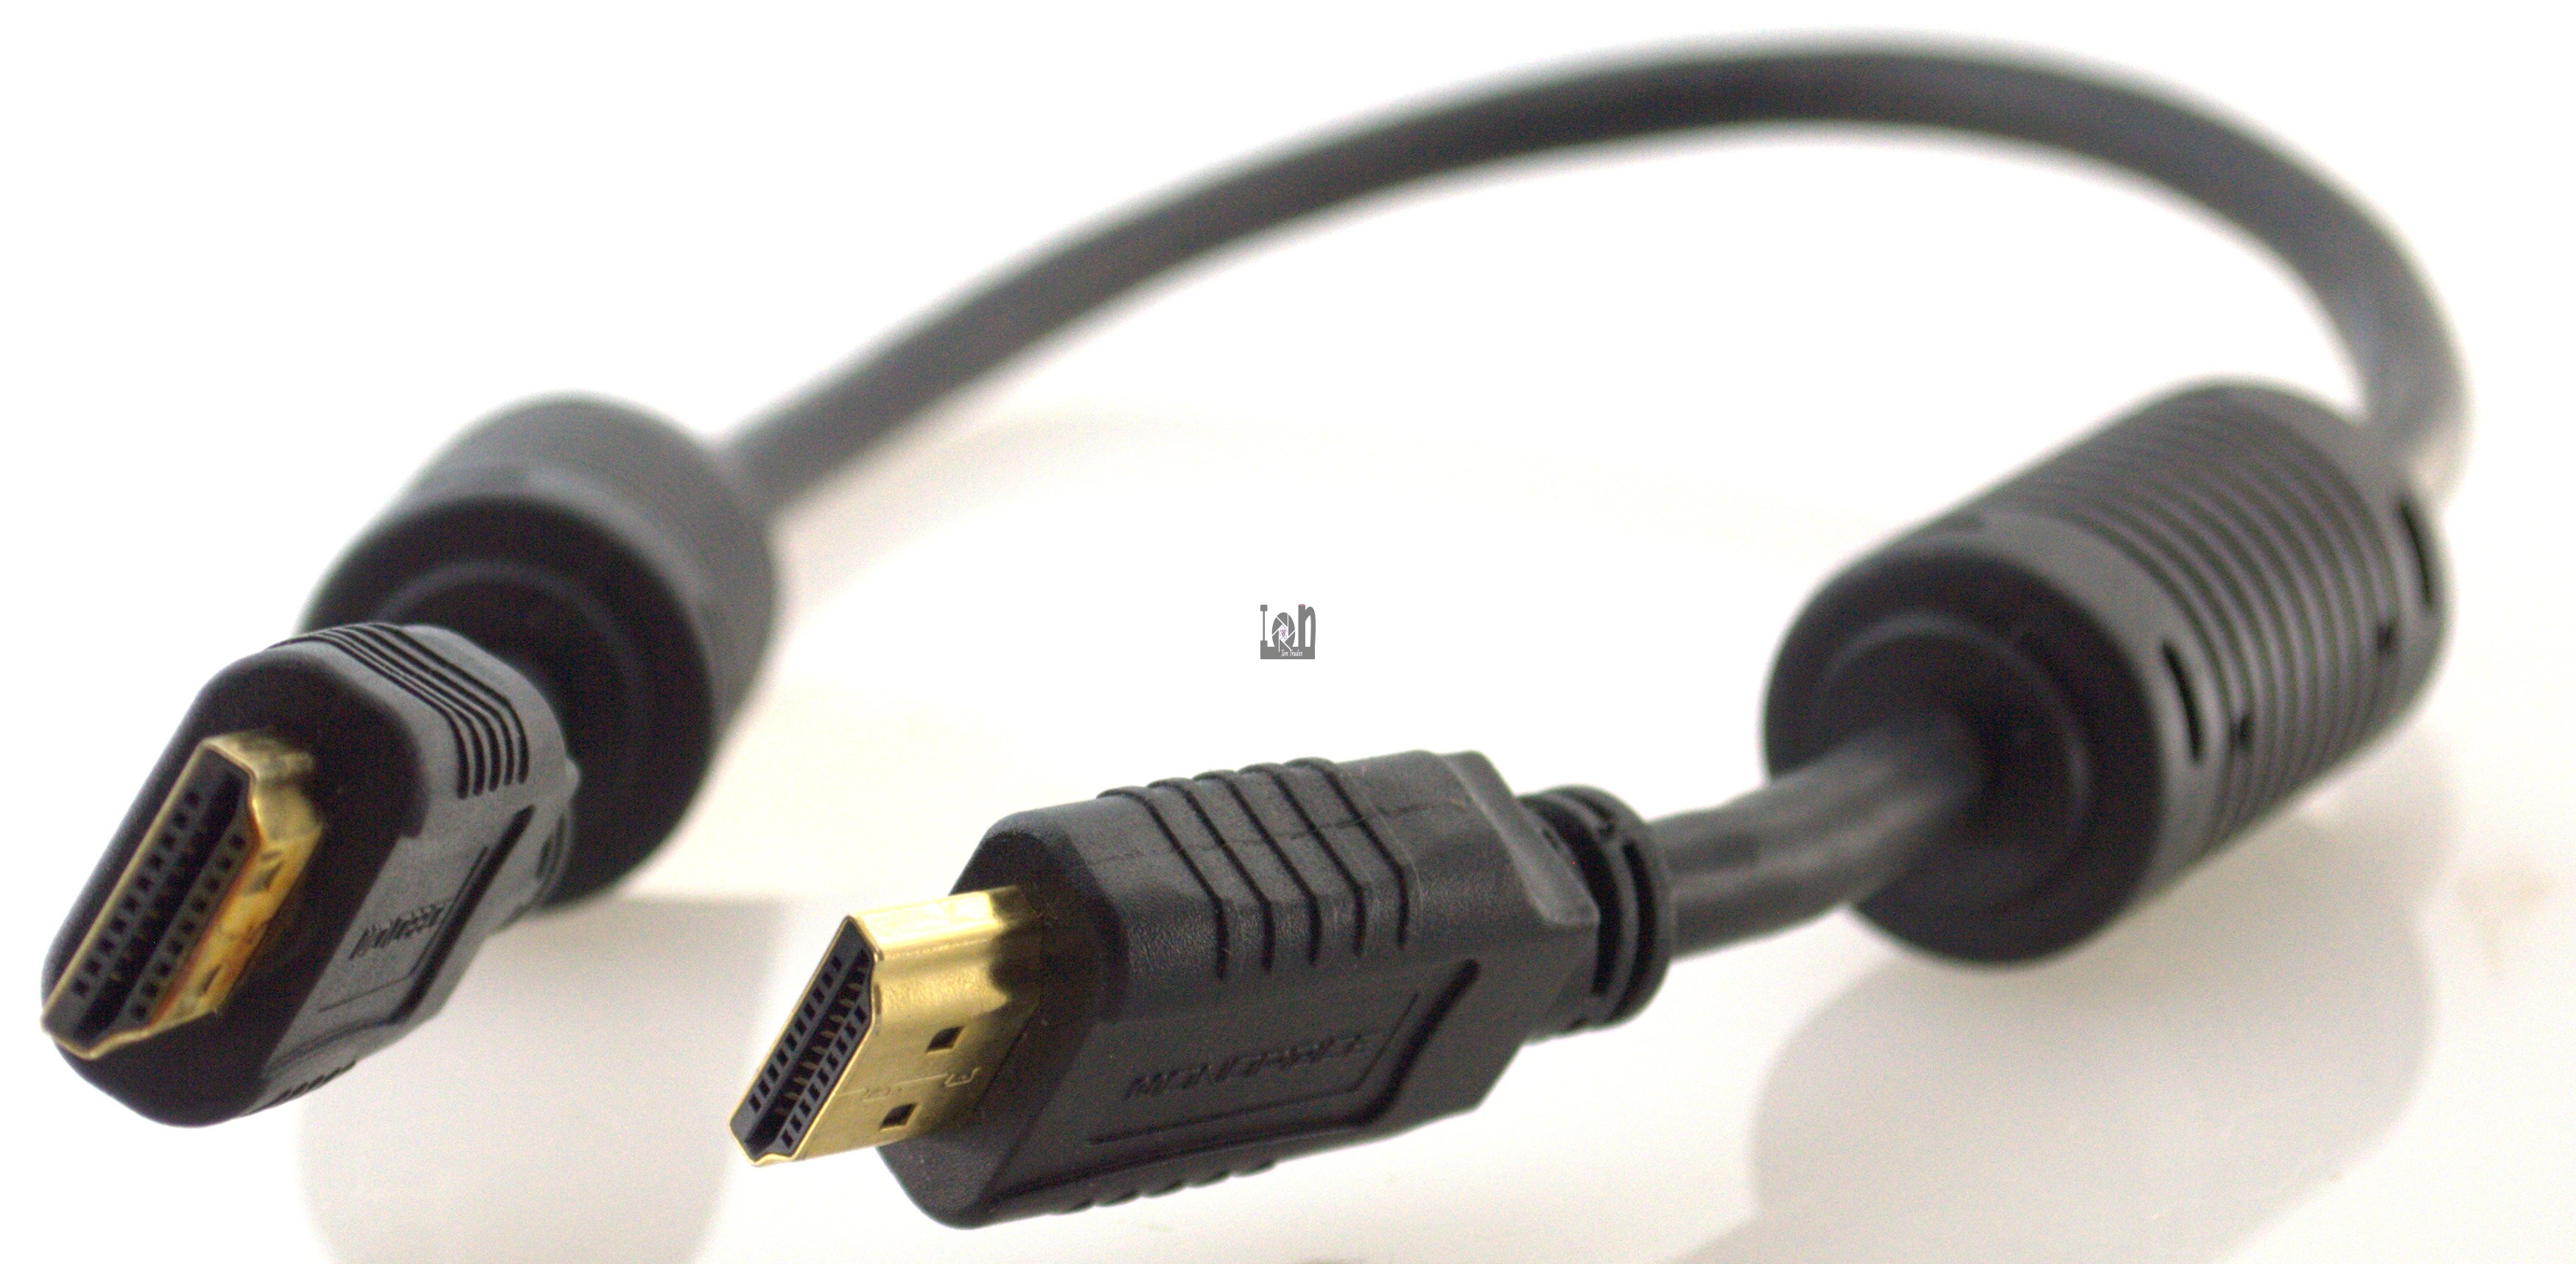 Monoprice 3872 HDMI Cable 1.5ft High Speed HDMI Cable